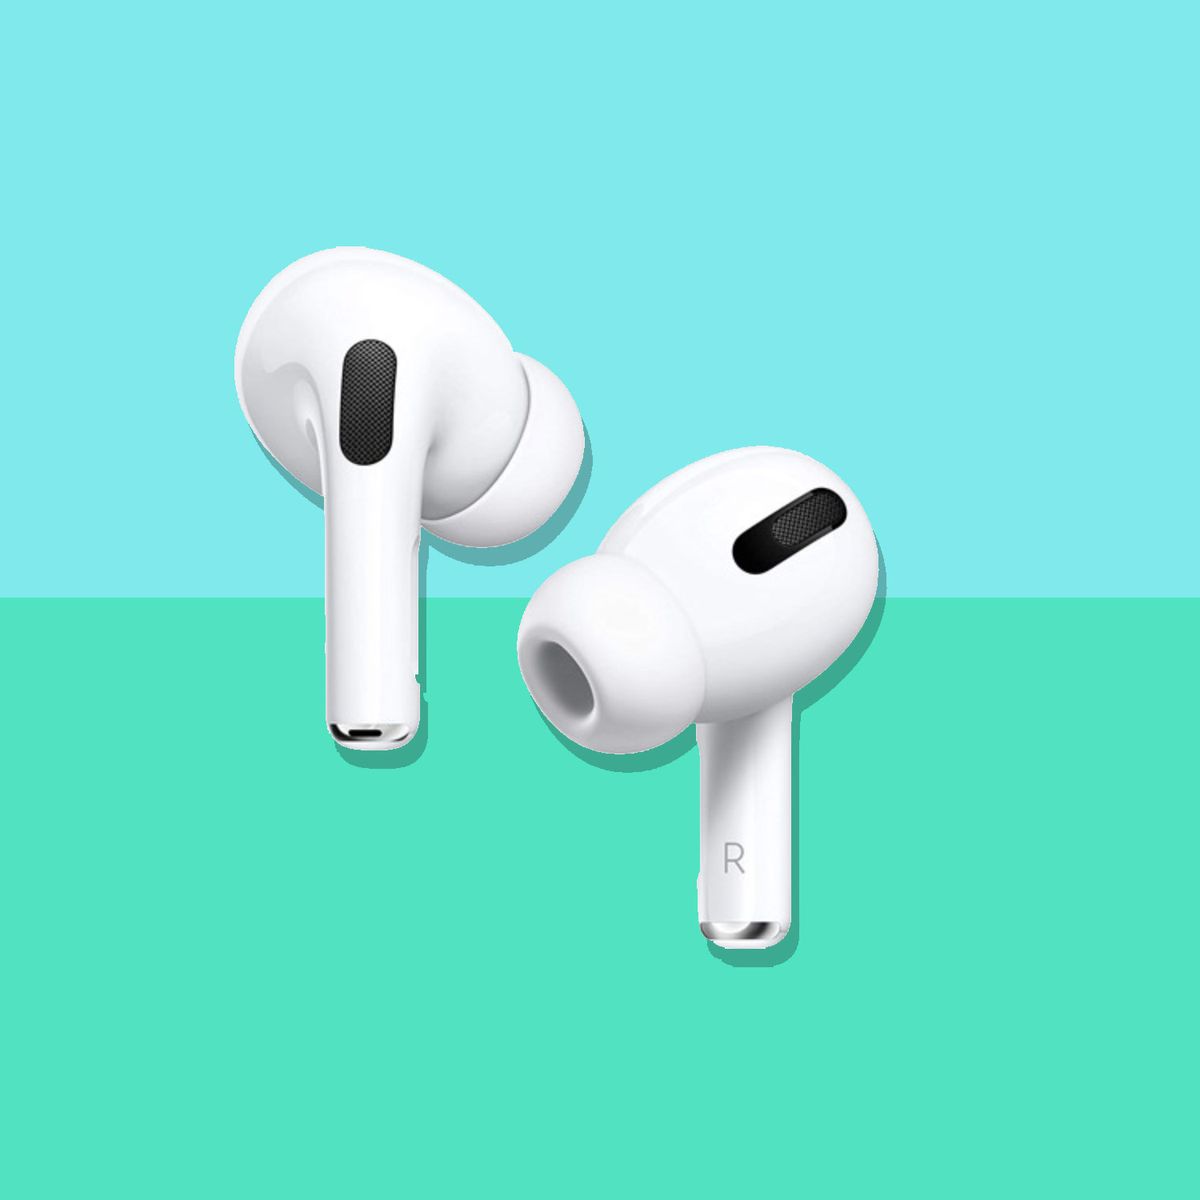 Apple AirPods Pro Black Friday Sale at Walmart 2021 | The Strategist